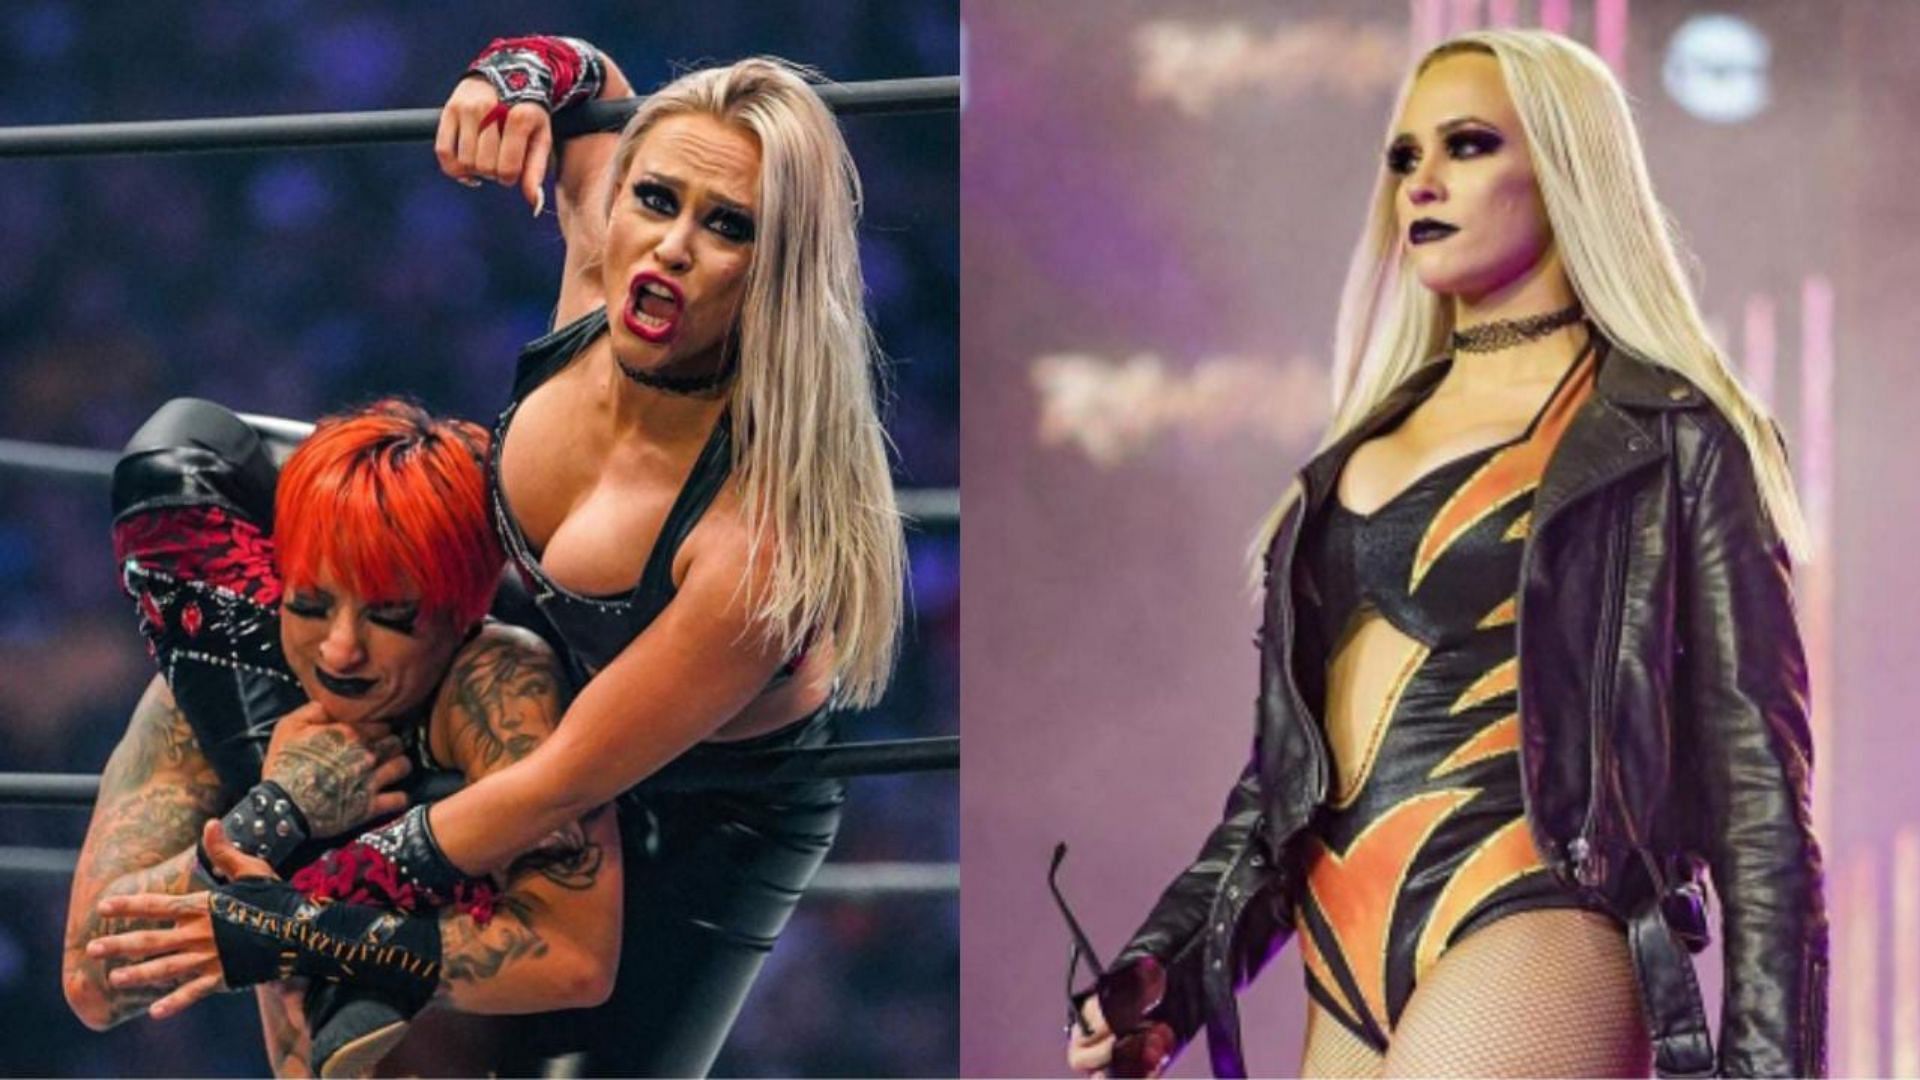 Penelope Ford showed off her new look on AEW Dynamite last night